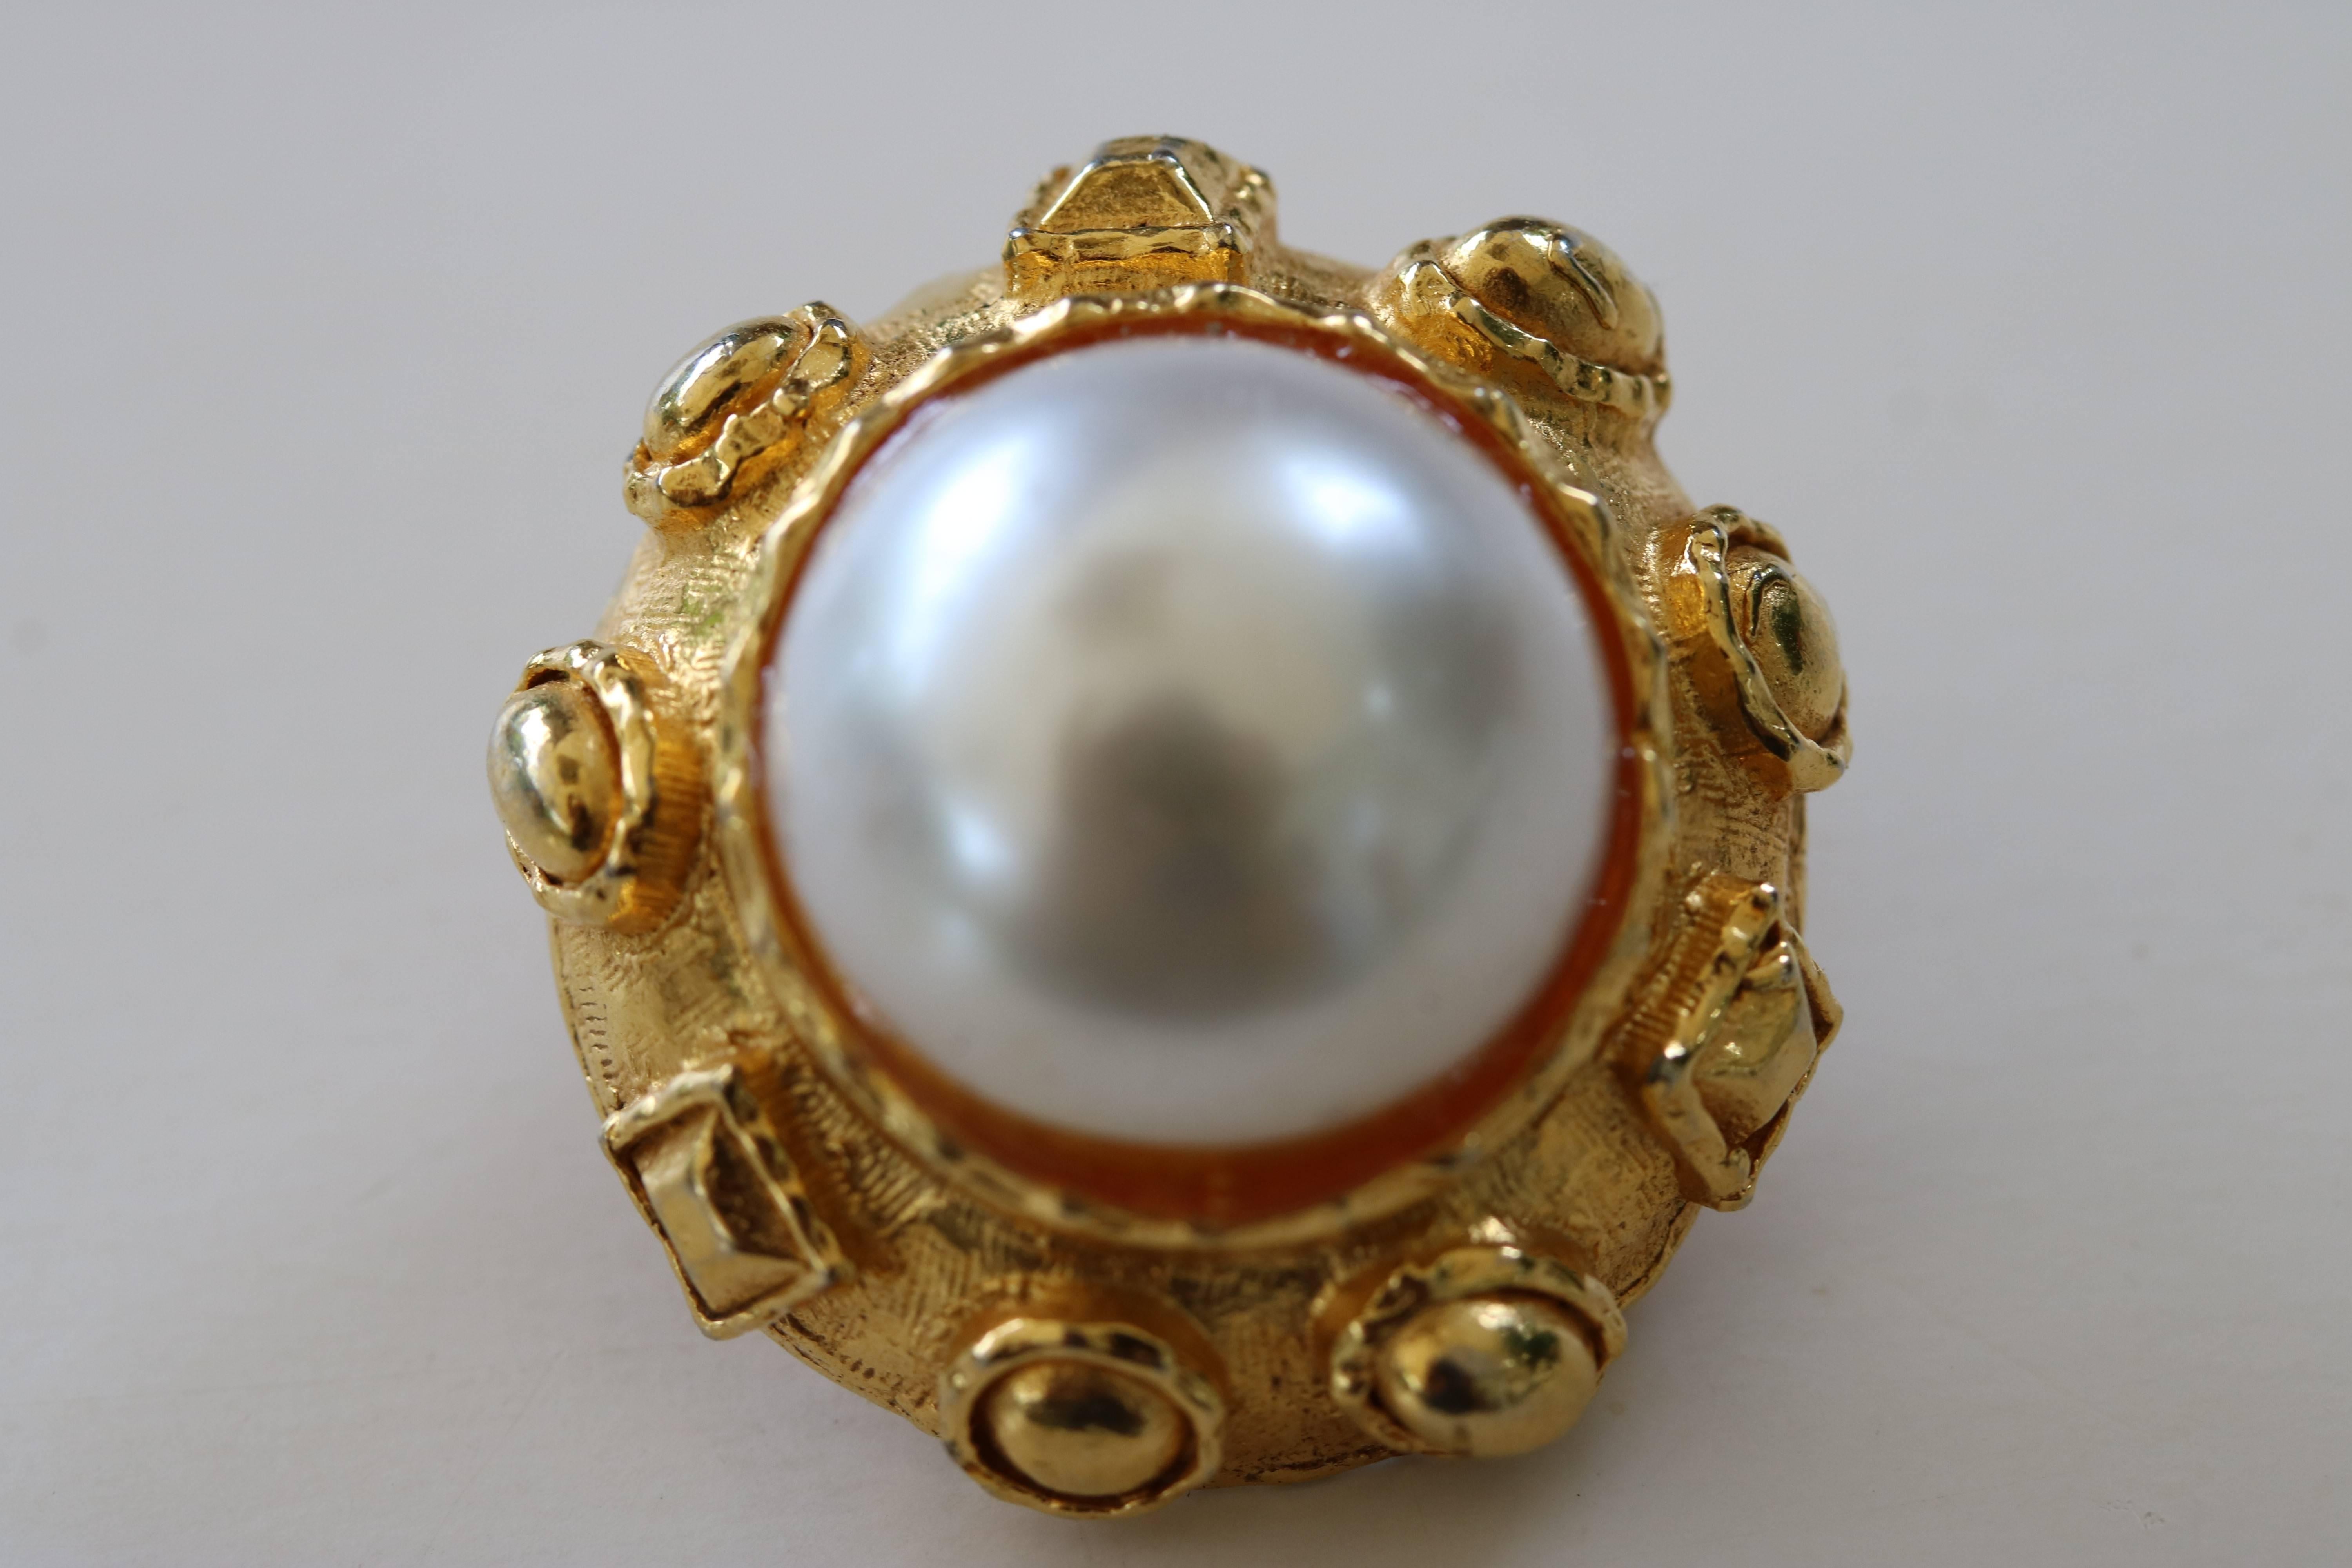 Early 1980s Chic faux pearl and heavy gold plate earrings. in the refined taste of Coco Chanel,
Large center faux pearl surrounded by heavy gold plate with designer decorative border.    unmarked clip ons.

 We have much more jewelry to offer-see